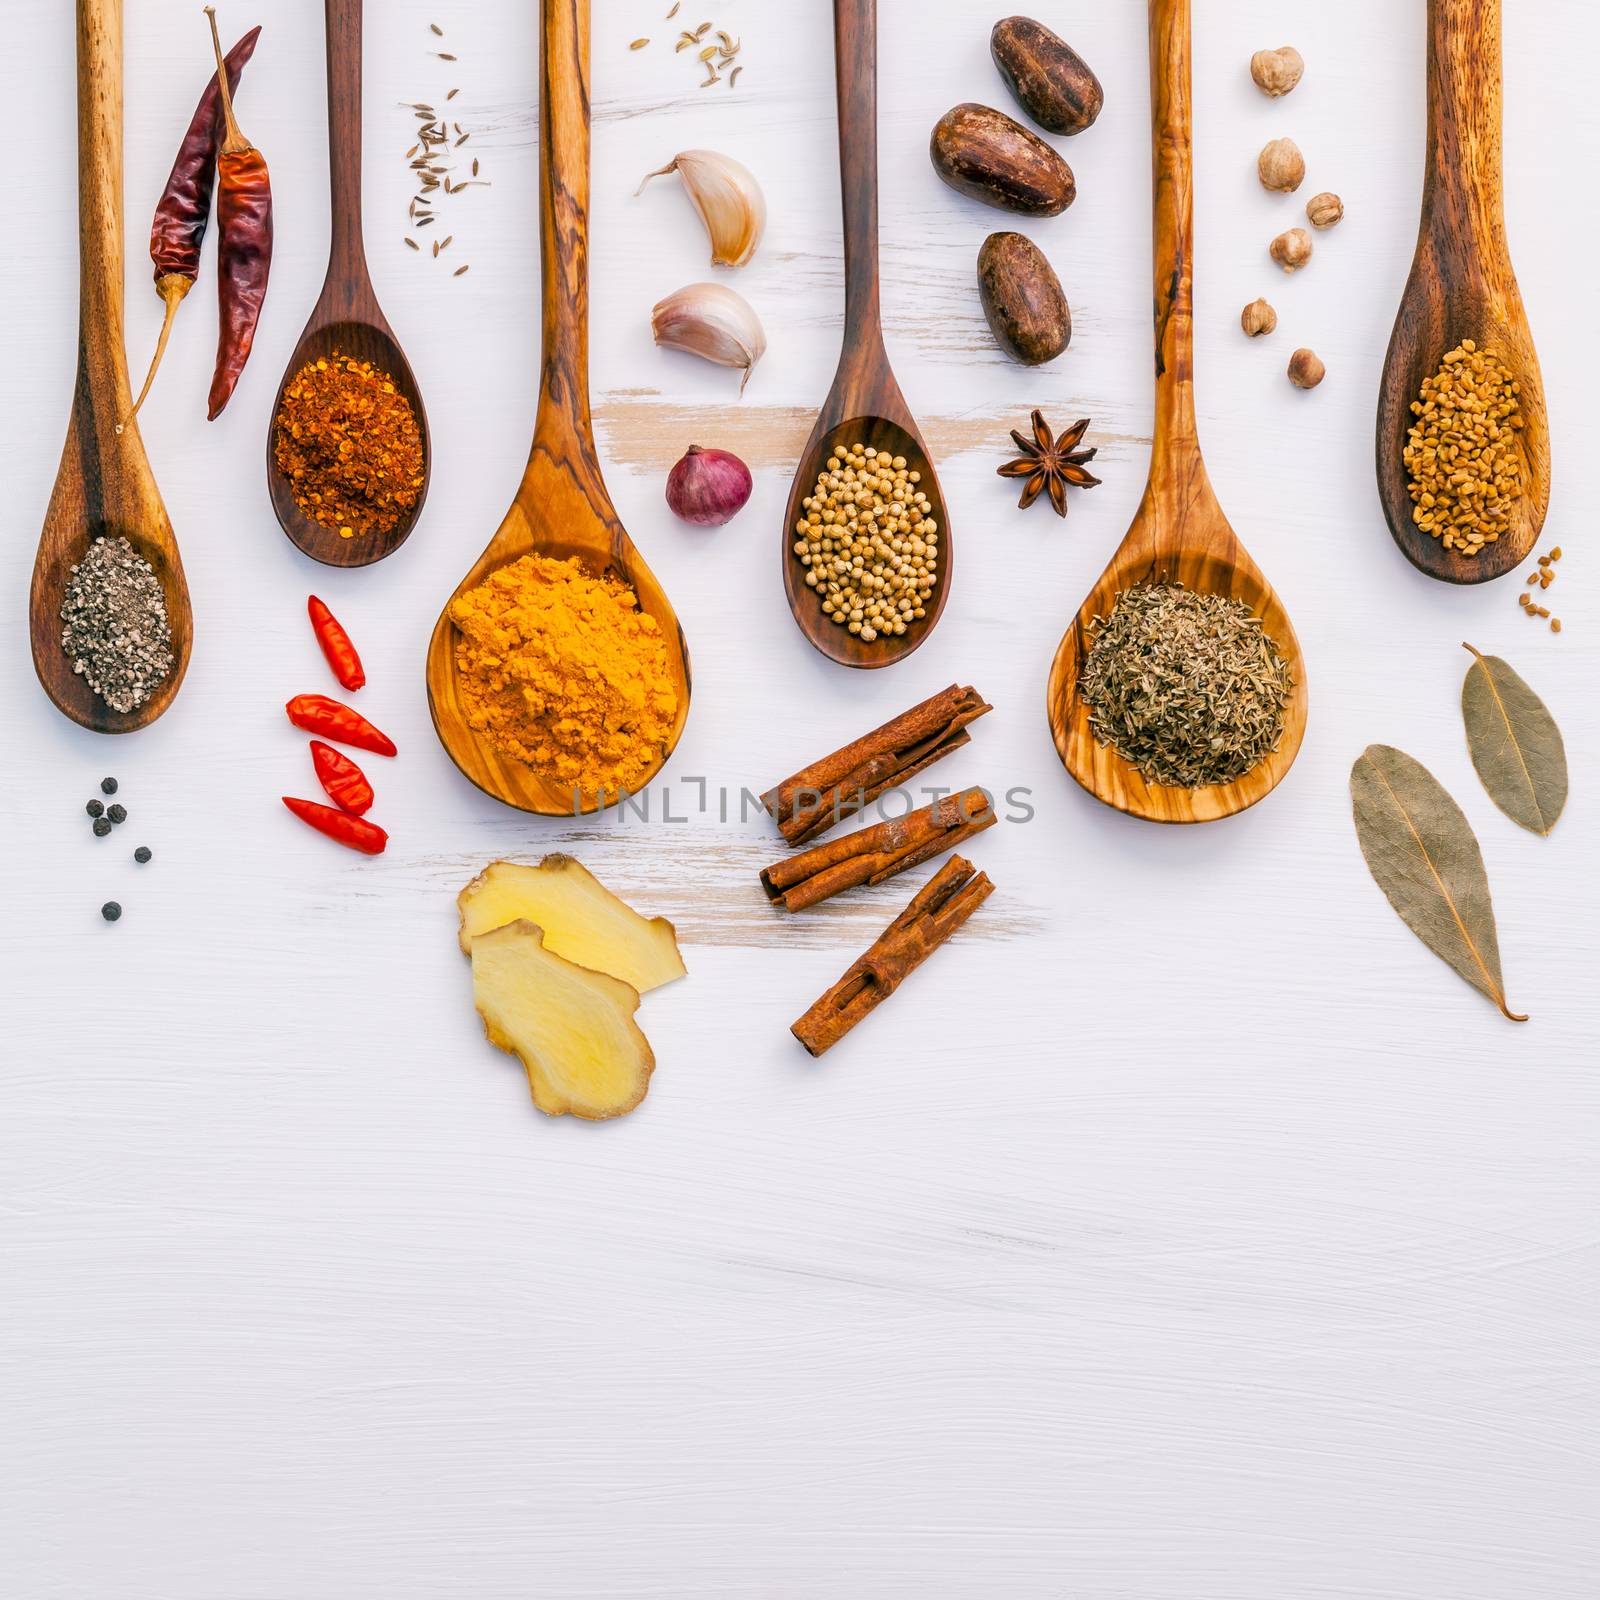 Various herbs and spices in wooden spoons. Flat lay of spices ingredients chilli ,pepper, garlic,dries thyme, cinnamon,star anise, nutmeg, shallot  ,bay leaves and fenugreek on wooden background.